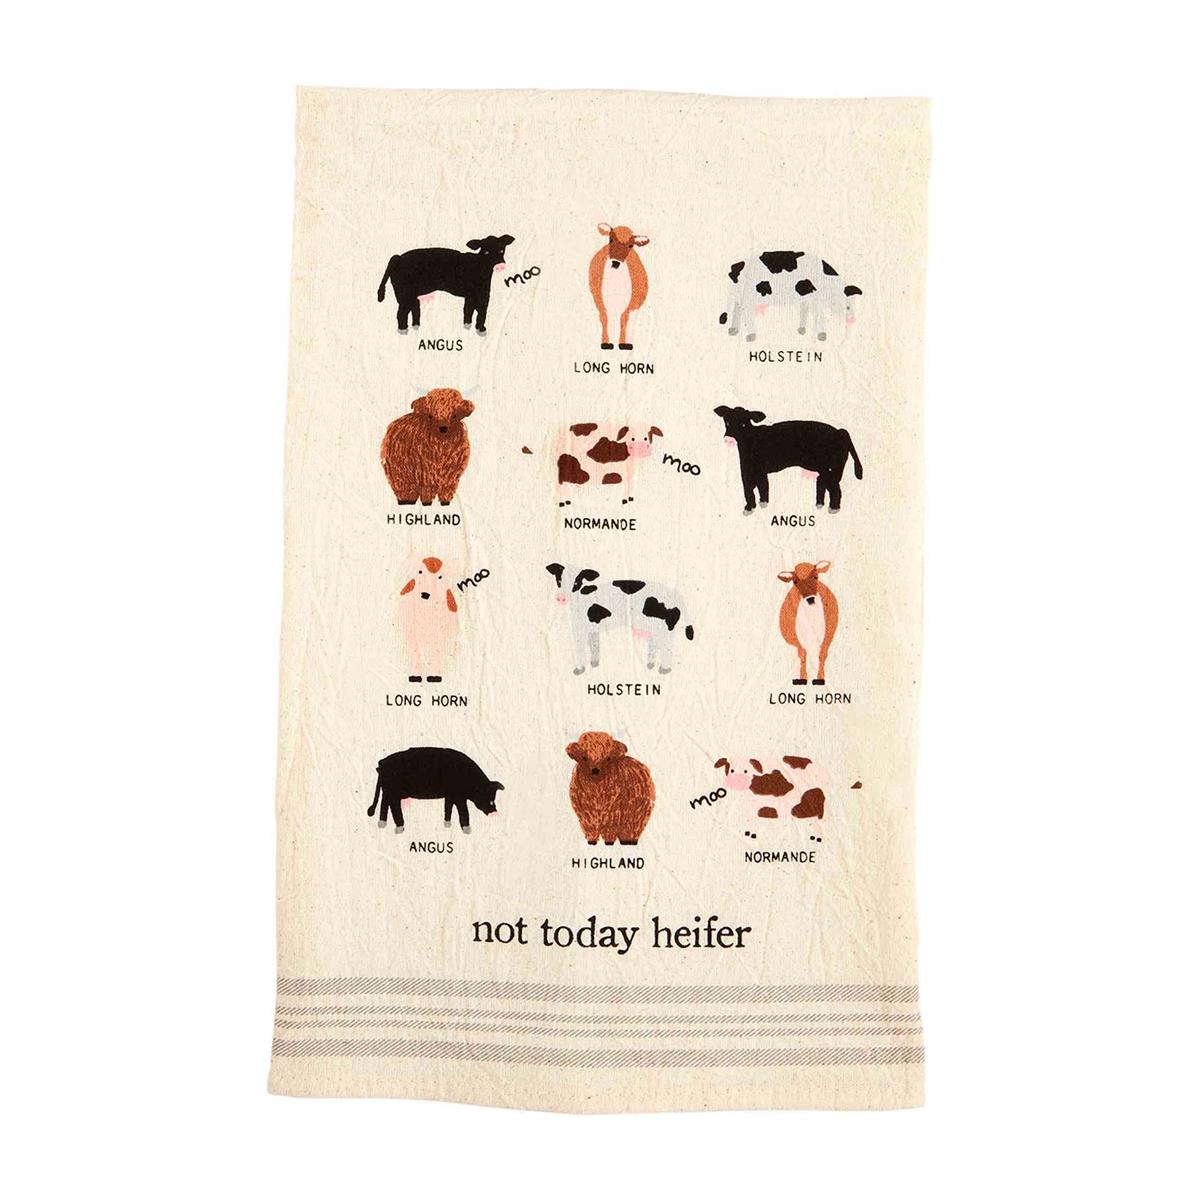 "not today heifer" towel printedw ith a variety of cows, their names, and "moo" printed here and there.